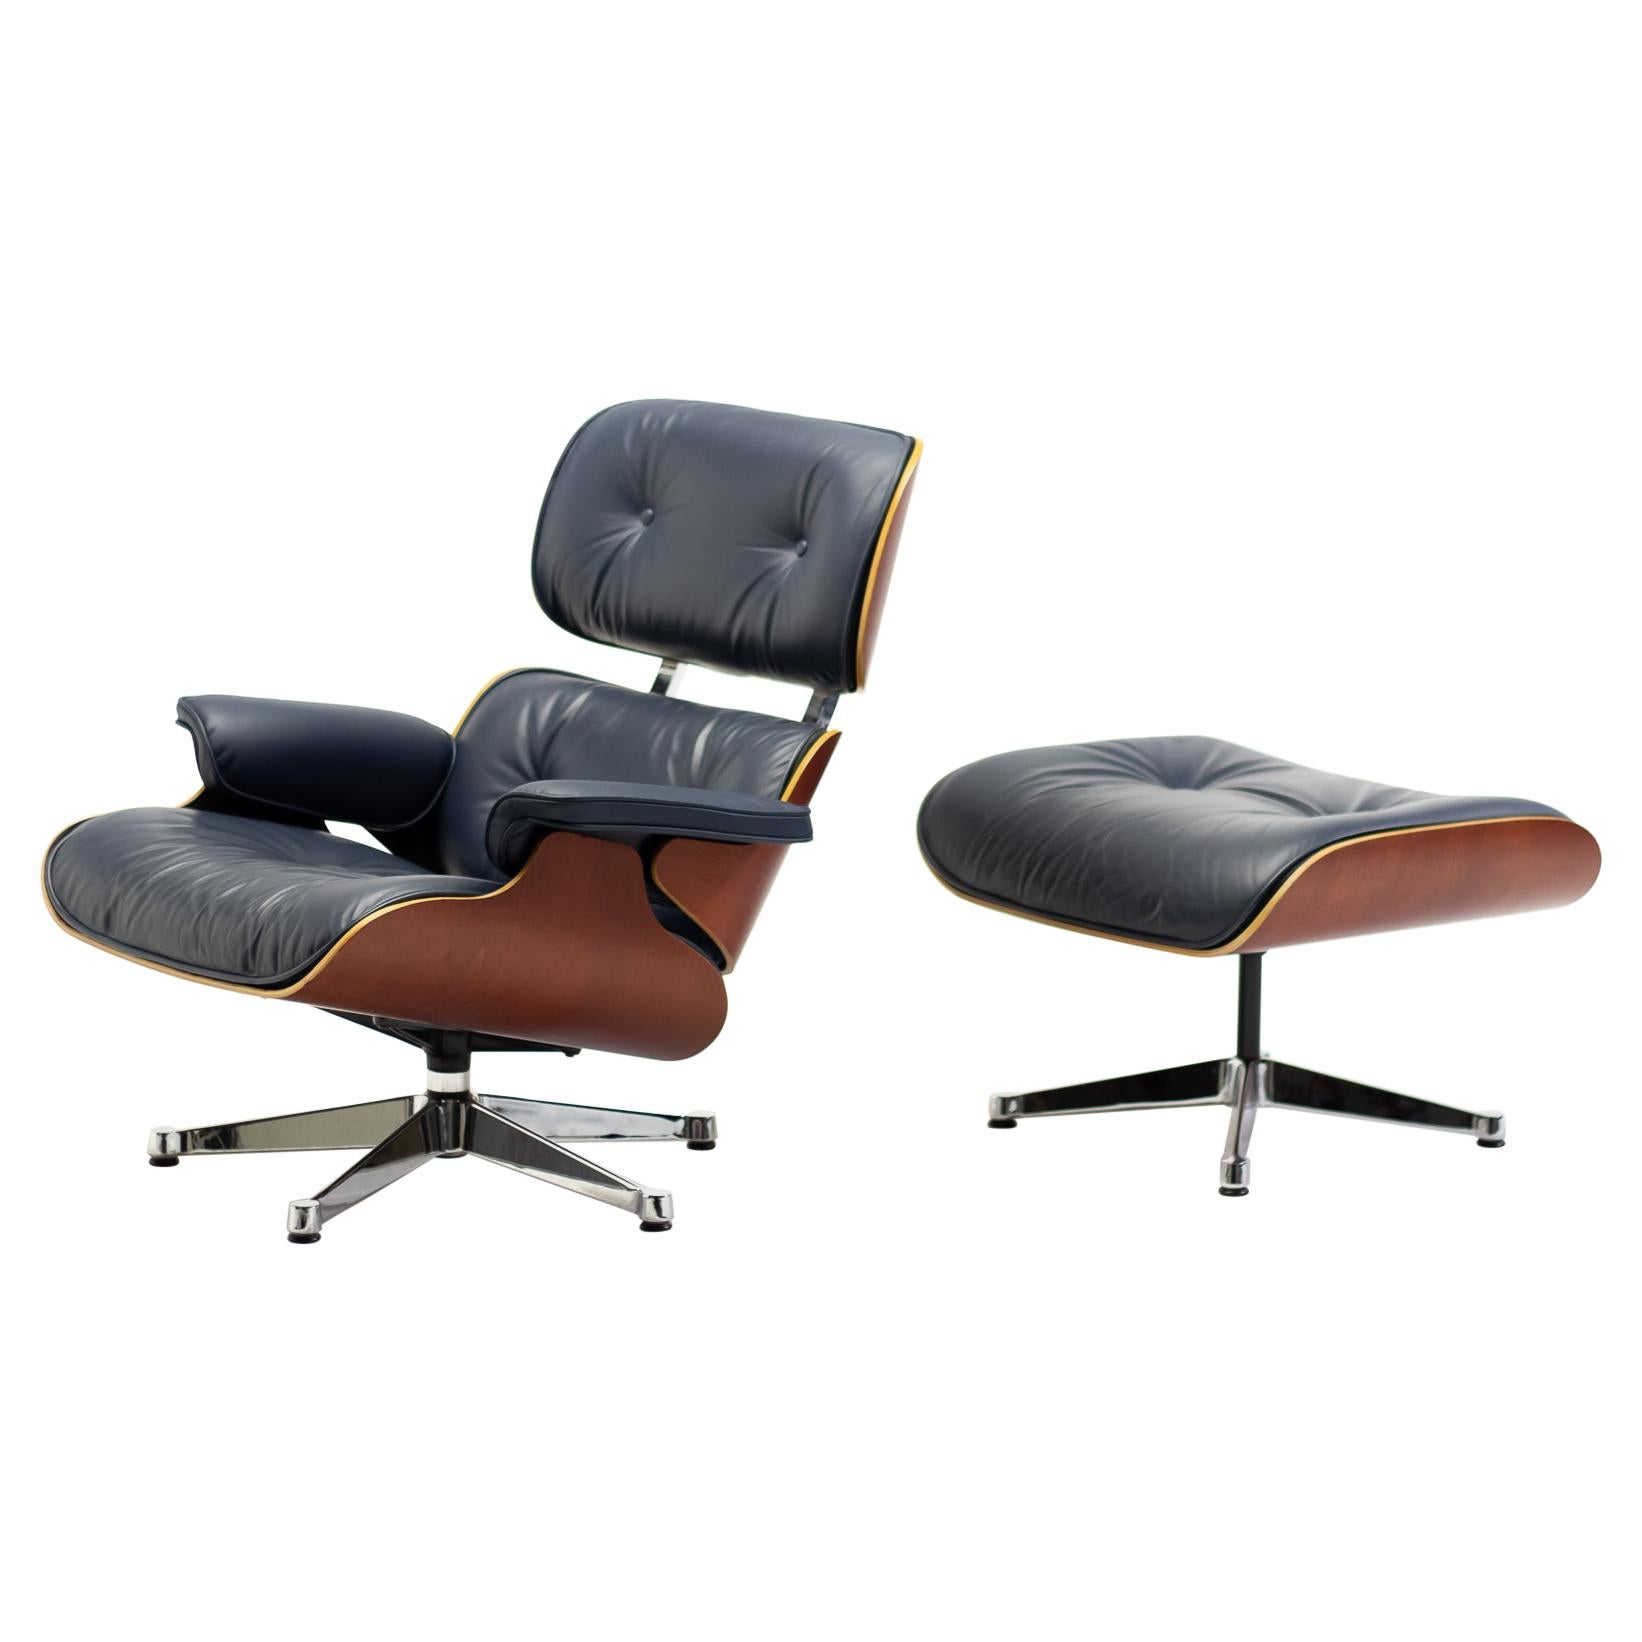 Charles & Ray Eames Blue Leather 670/671 Lounge Chair and Ottoman